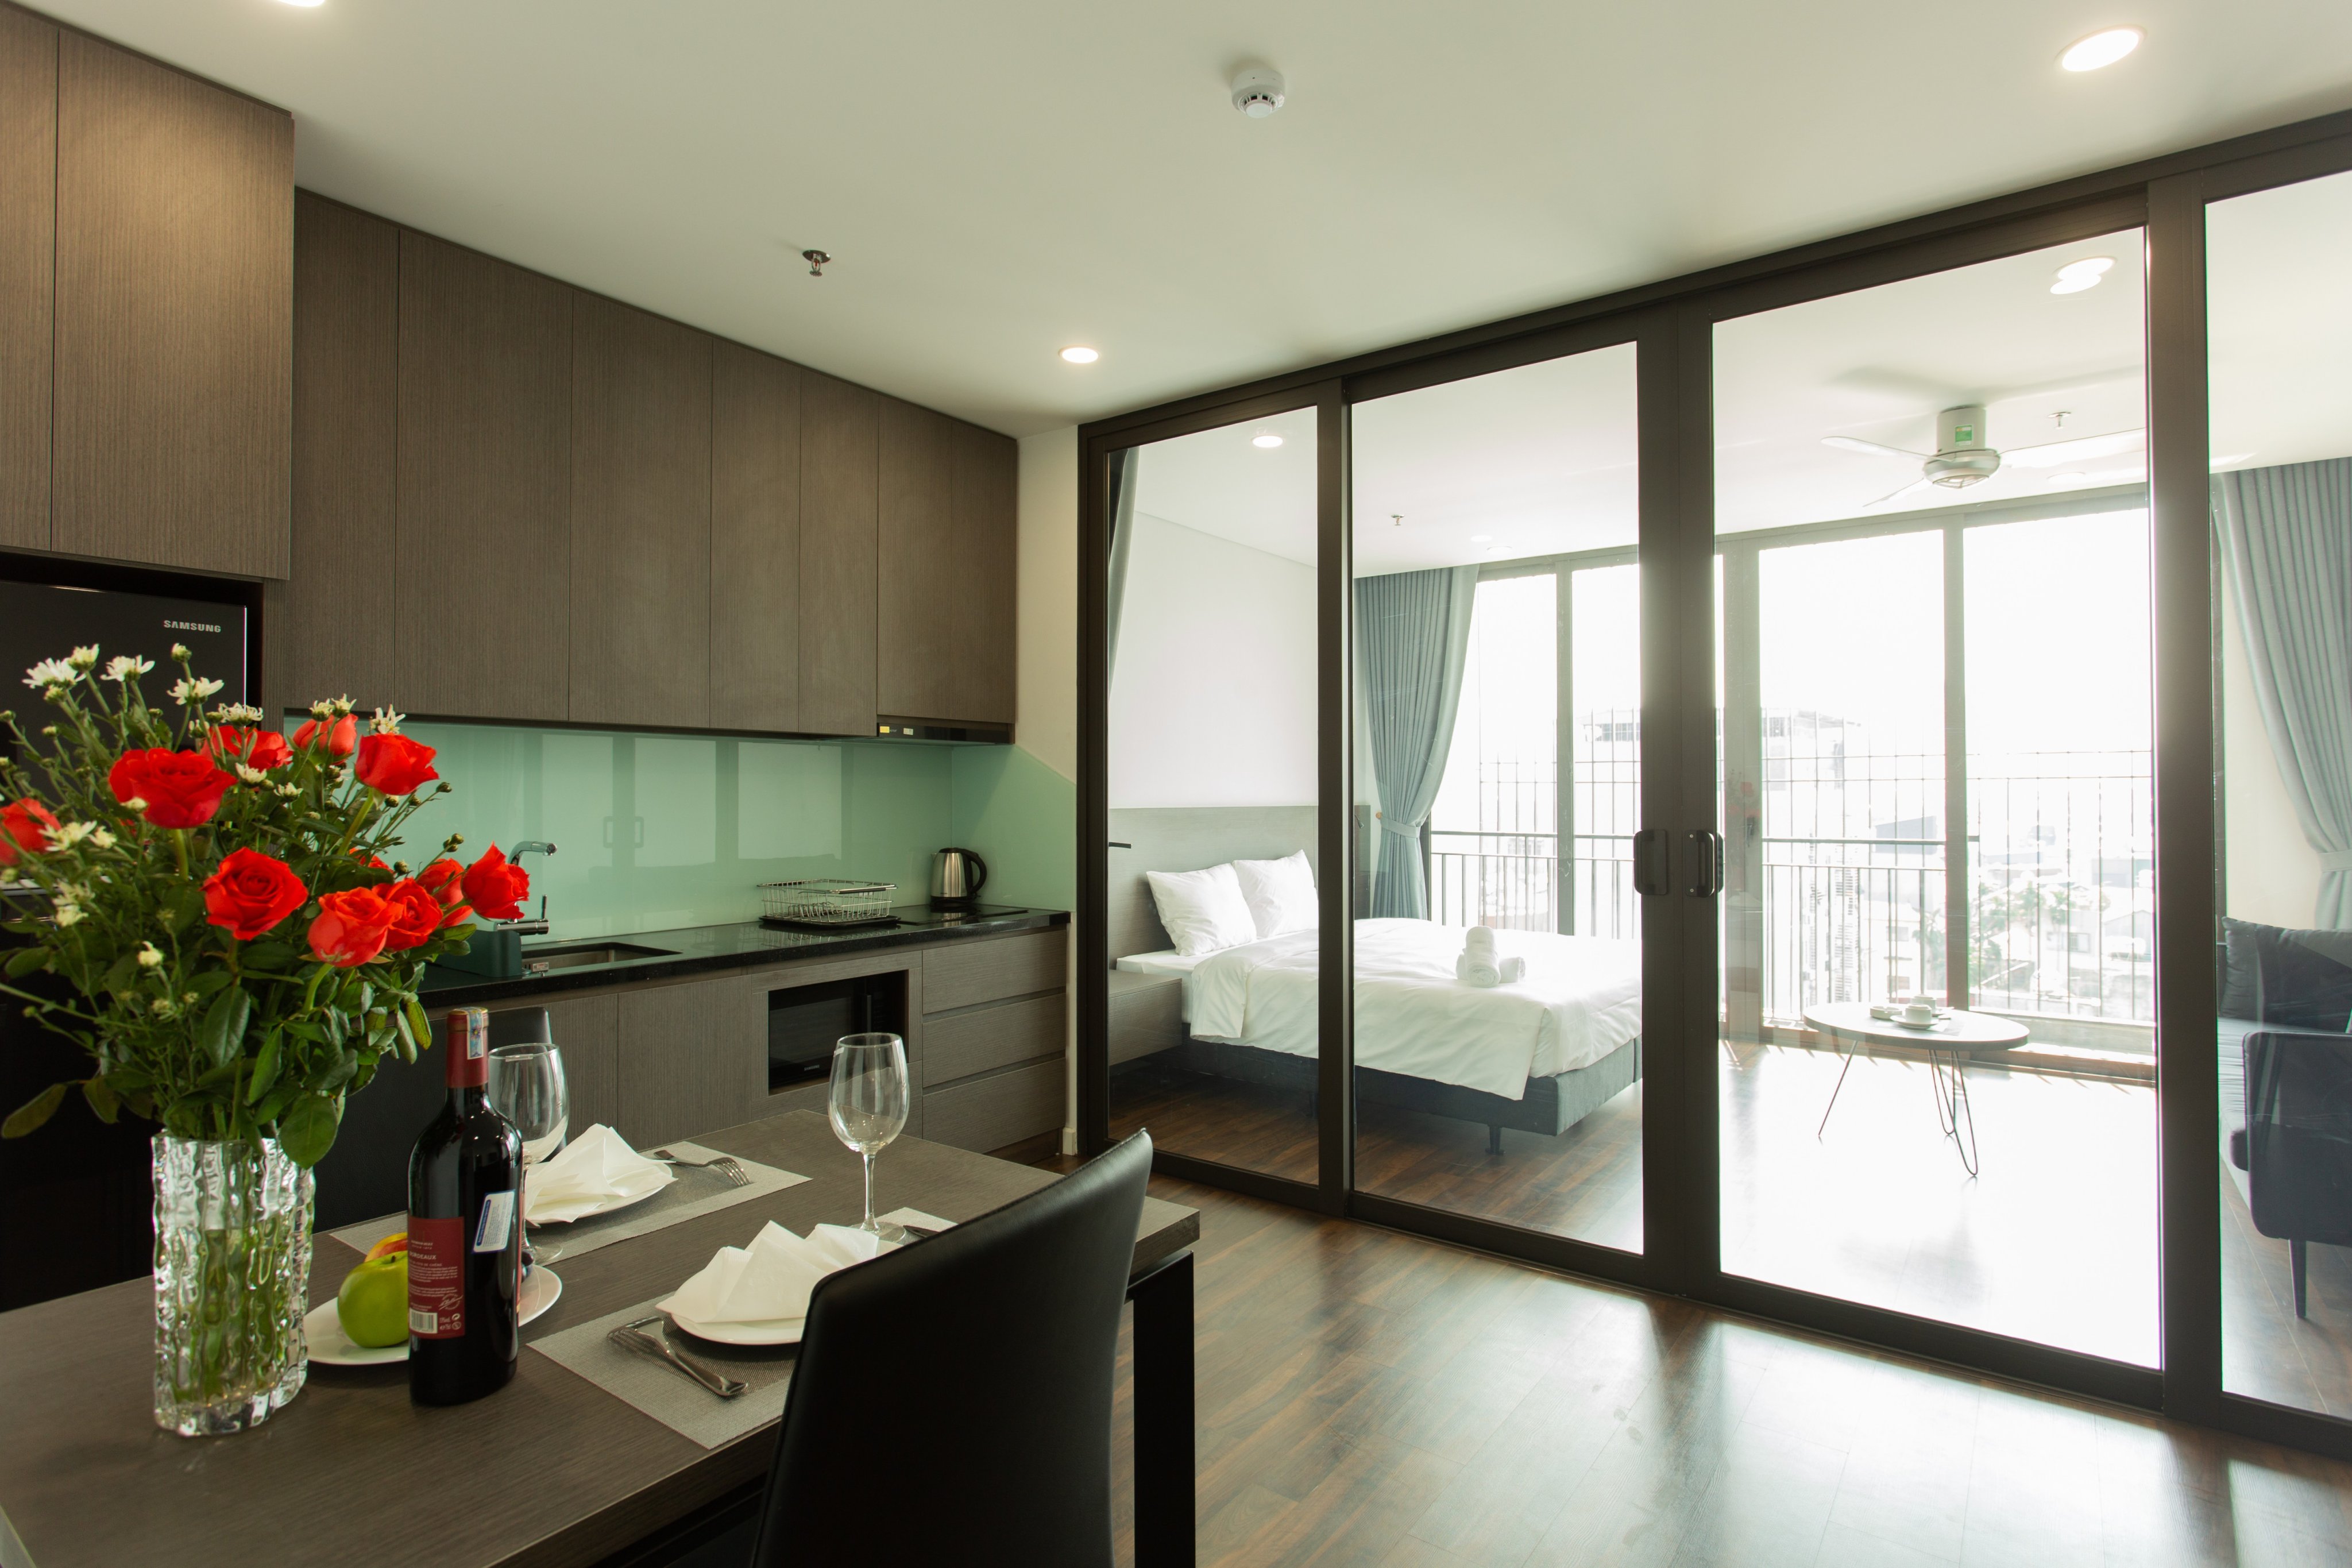 New Modern apartment for rent in Doi Can str, Ba Dinh distr, high quality furniture